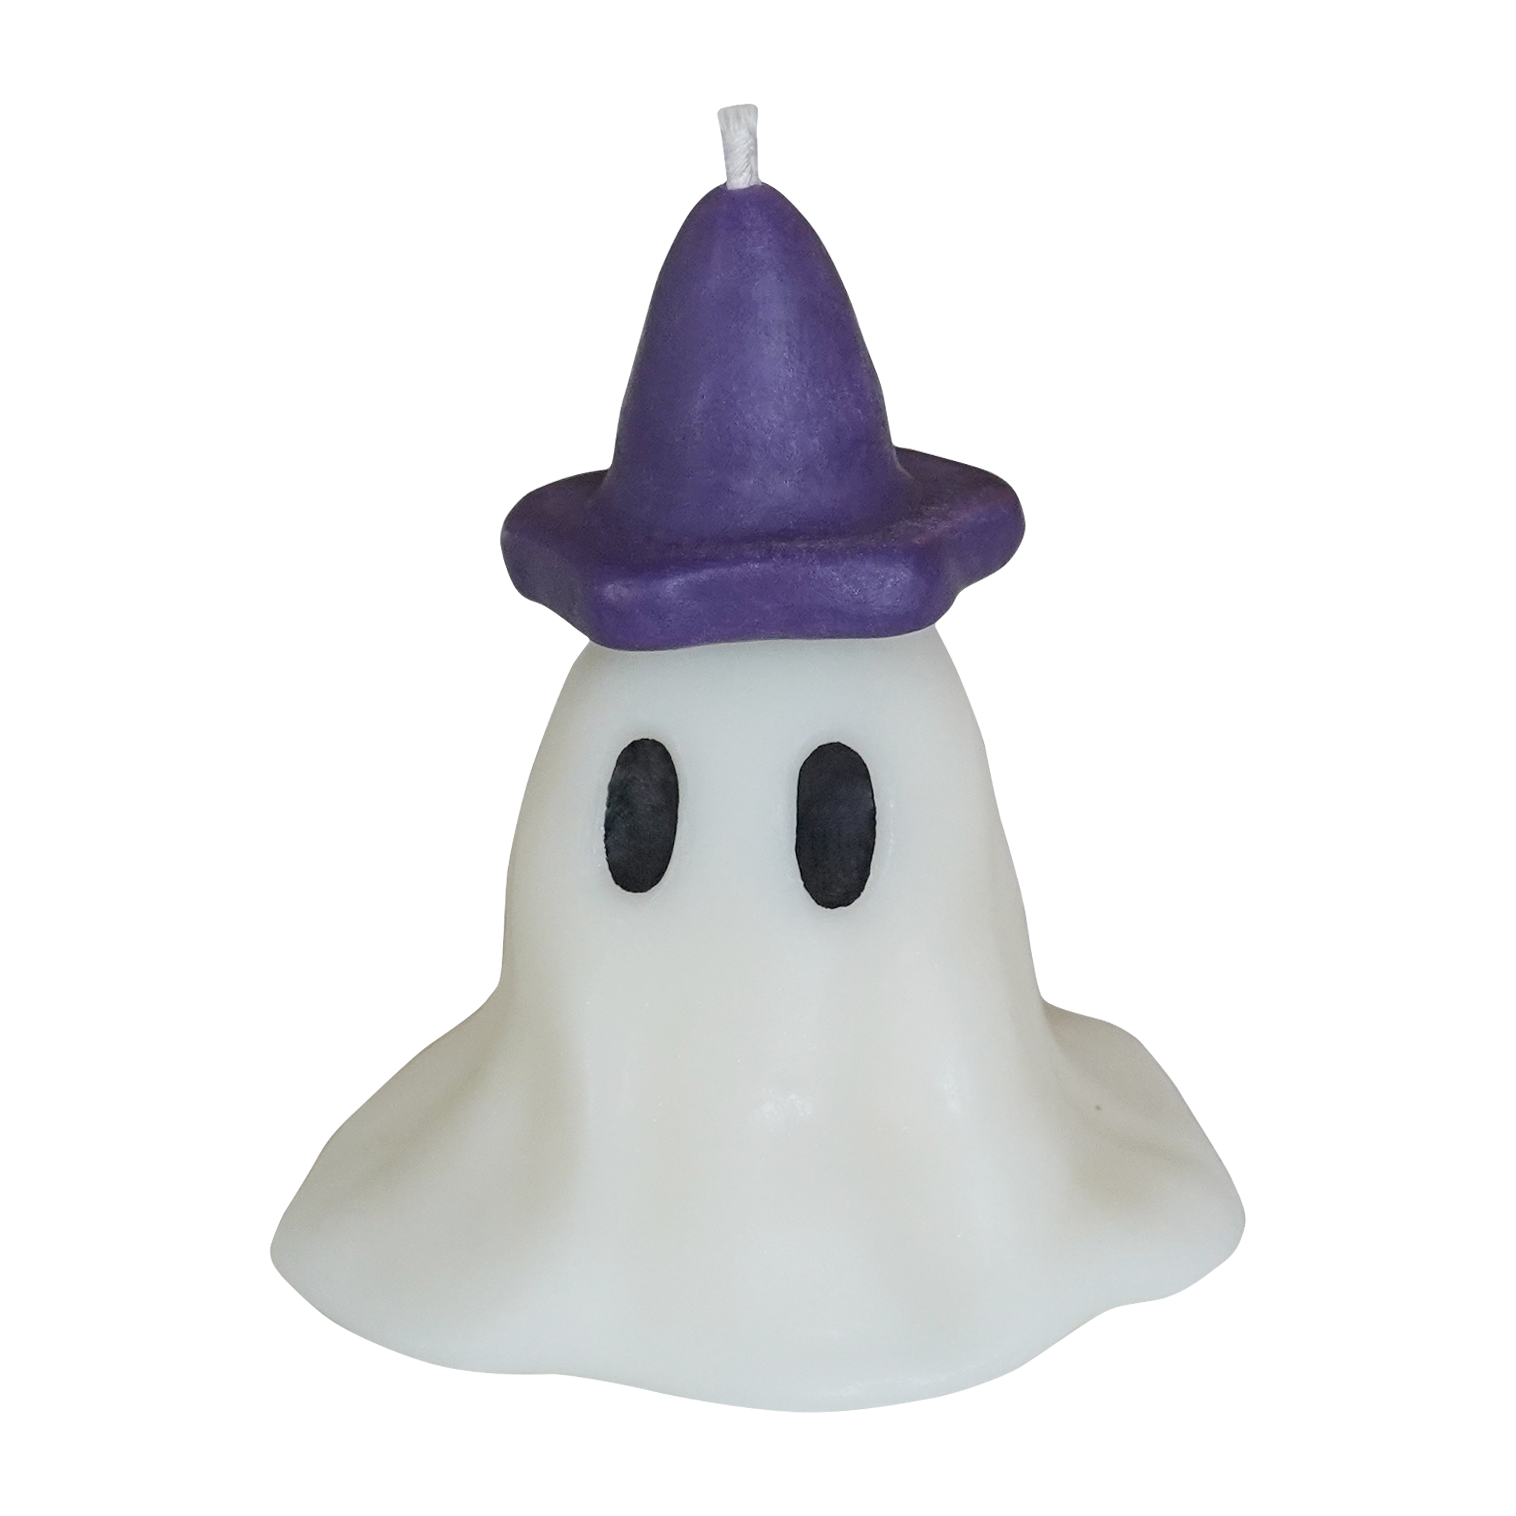 wizard ghost candle with purple hat for spooky halloween party decor